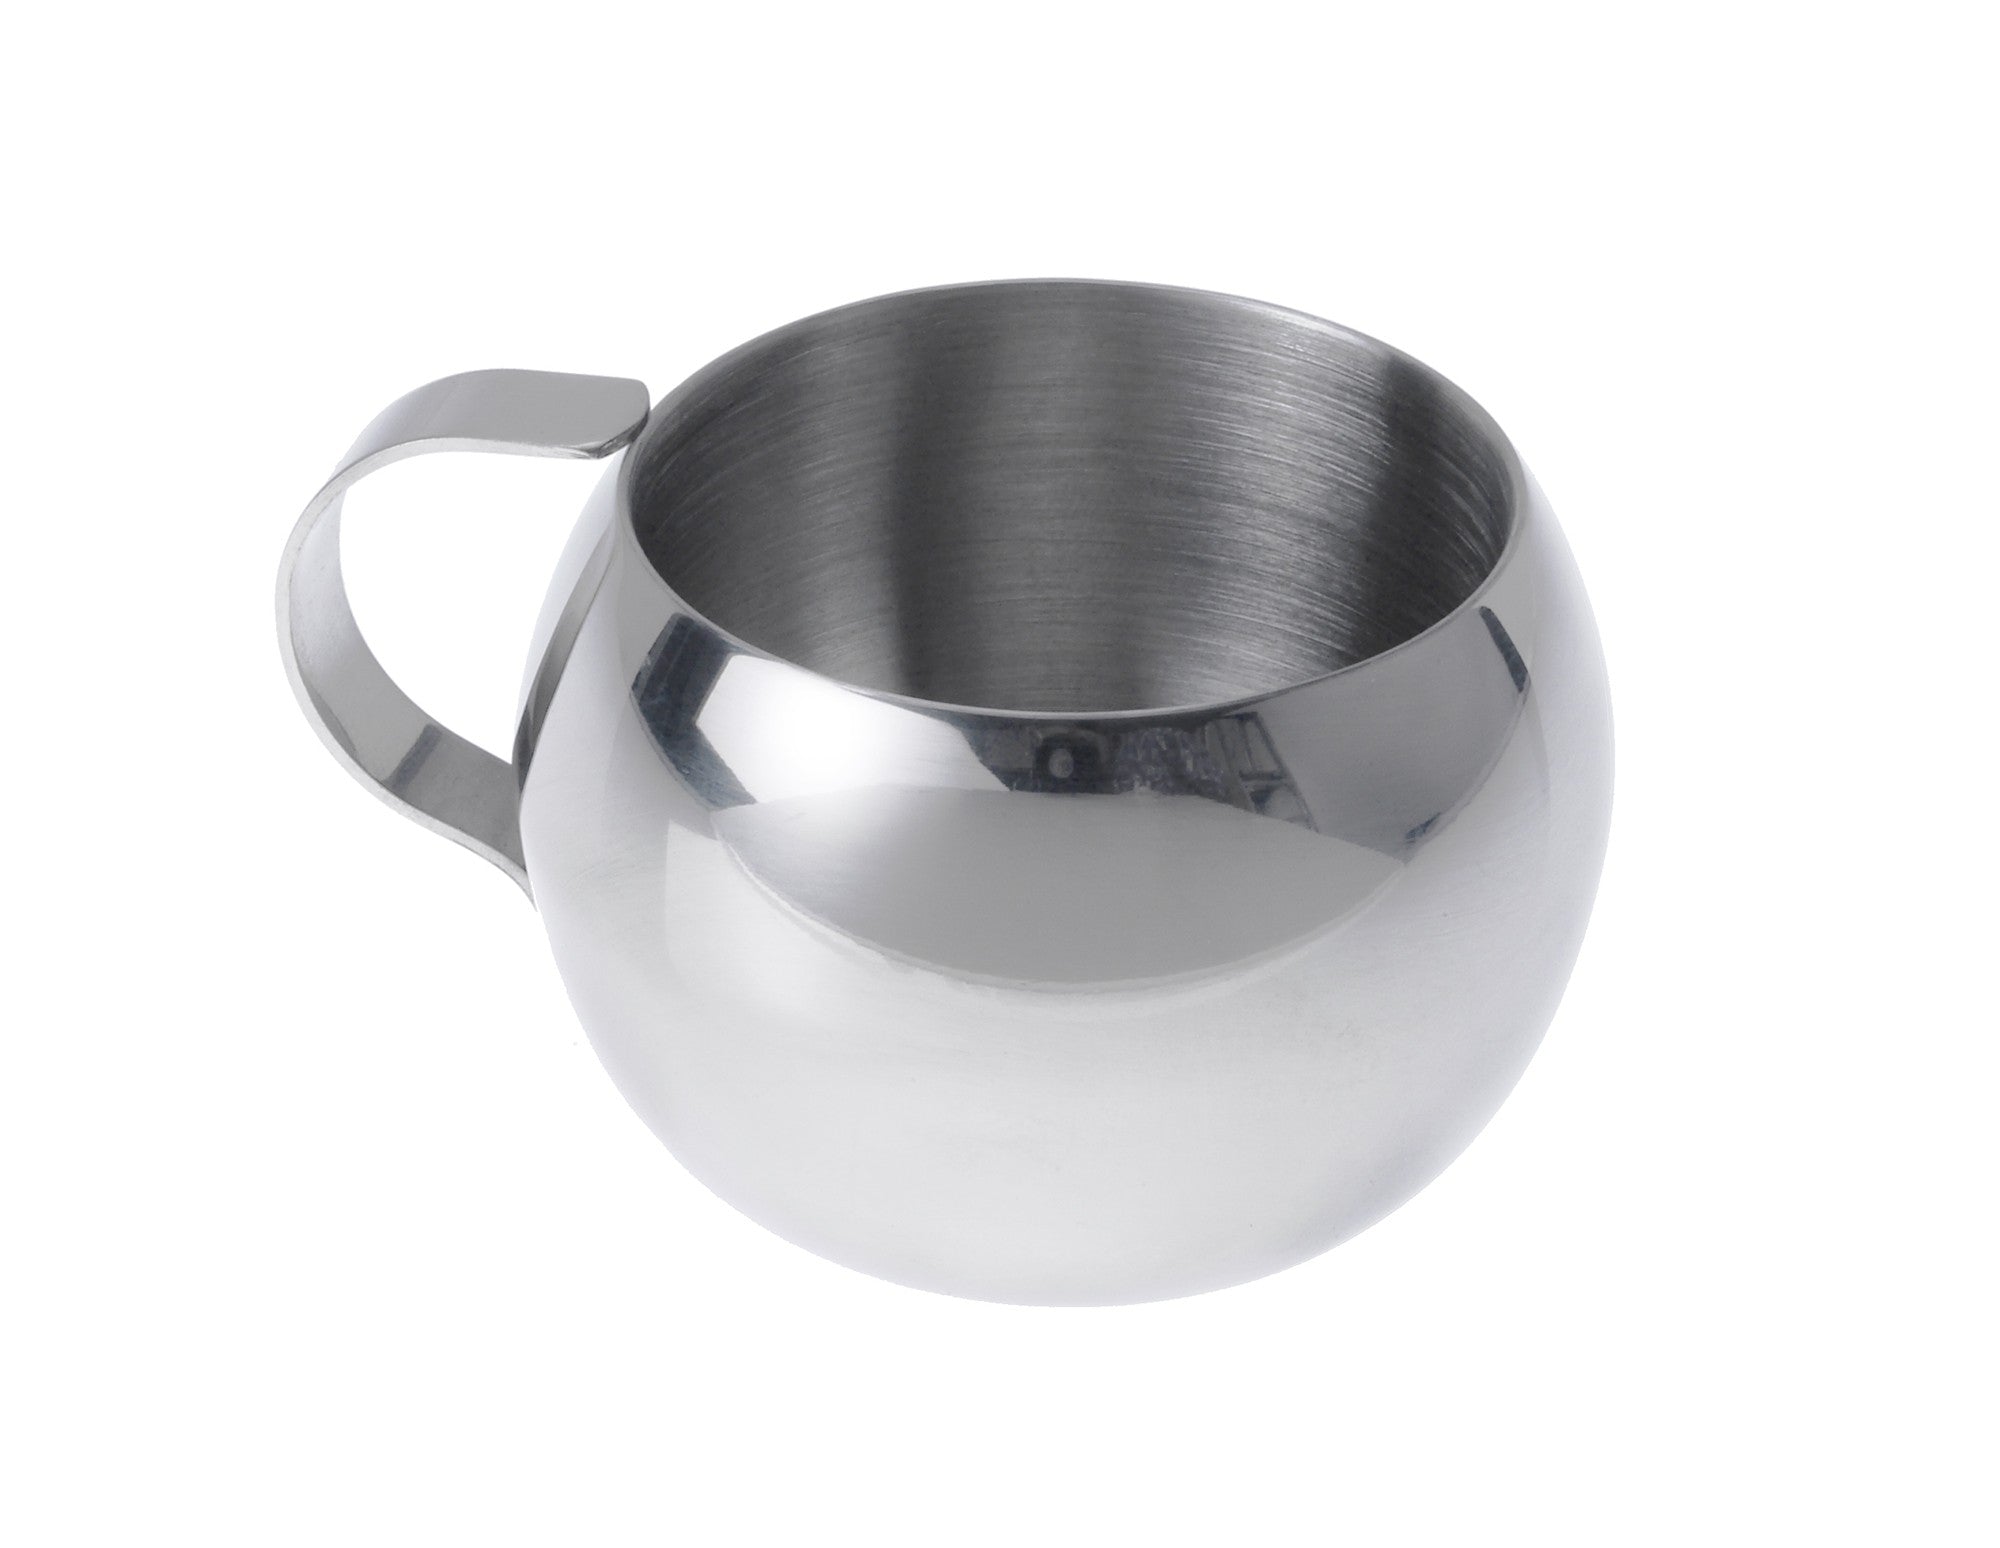 Glacier Stainless Double Walled Espresso Cup